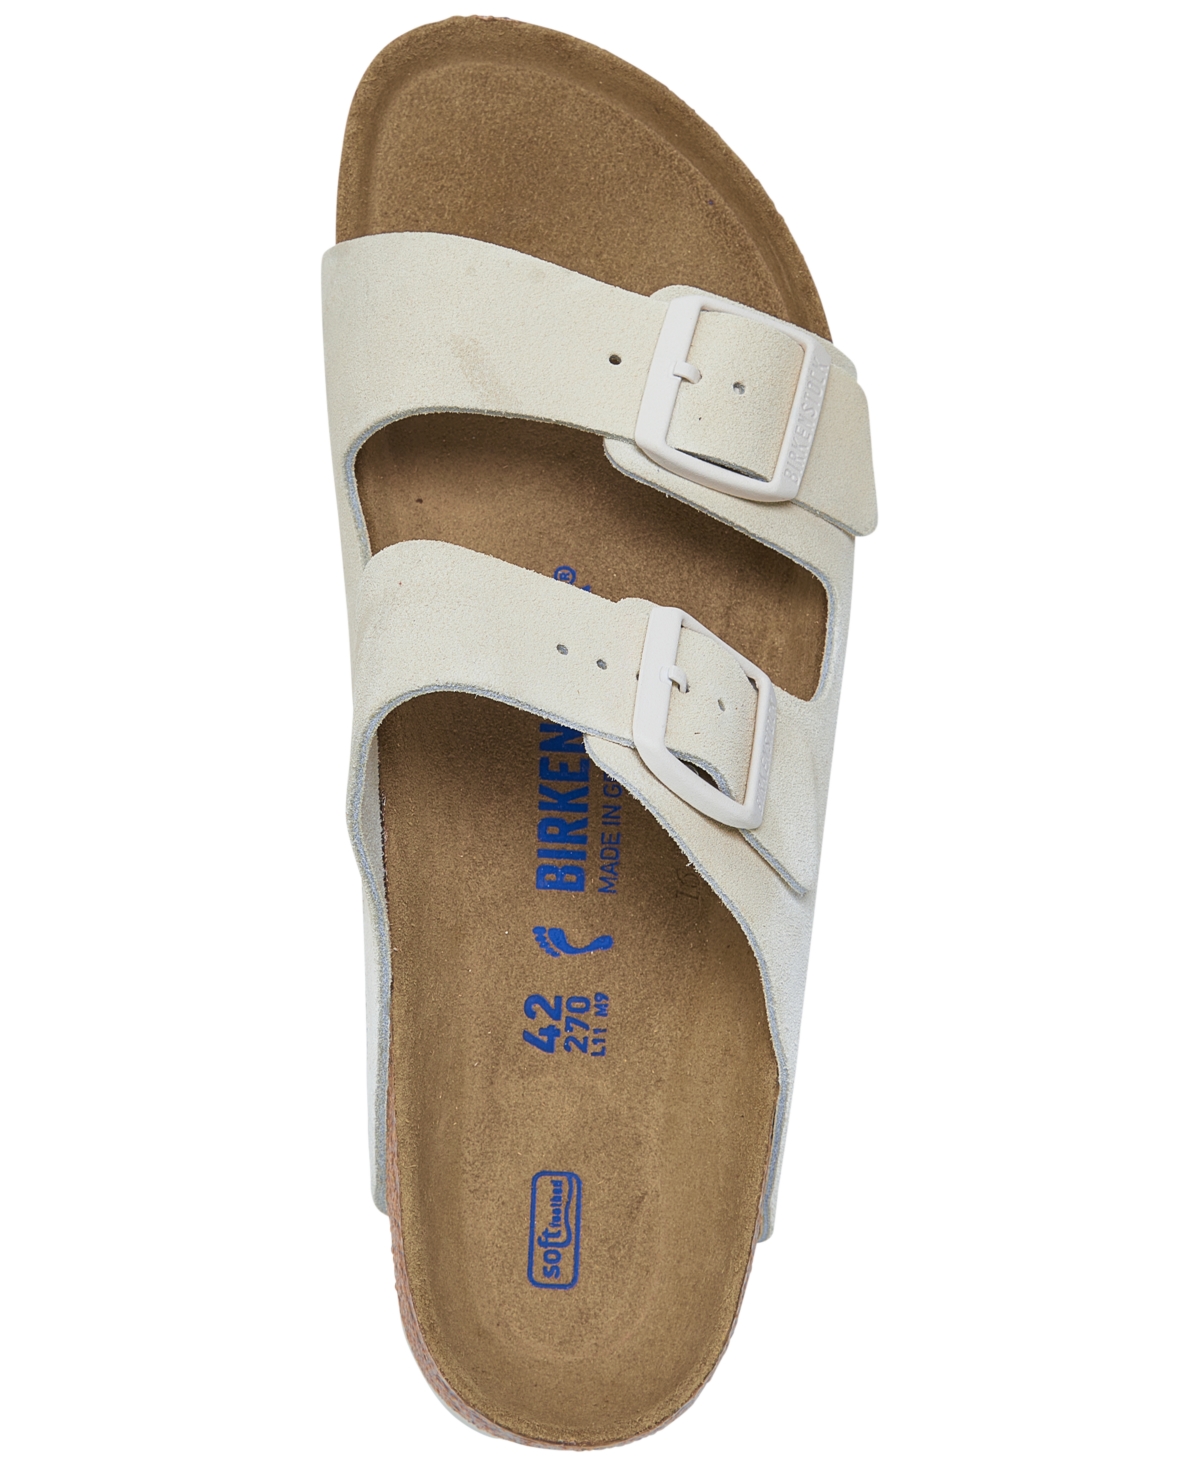 Shop Birkenstock Women's Arizona Soft Footbed Suede Leather Sandals From Finish Line In Antique-like White